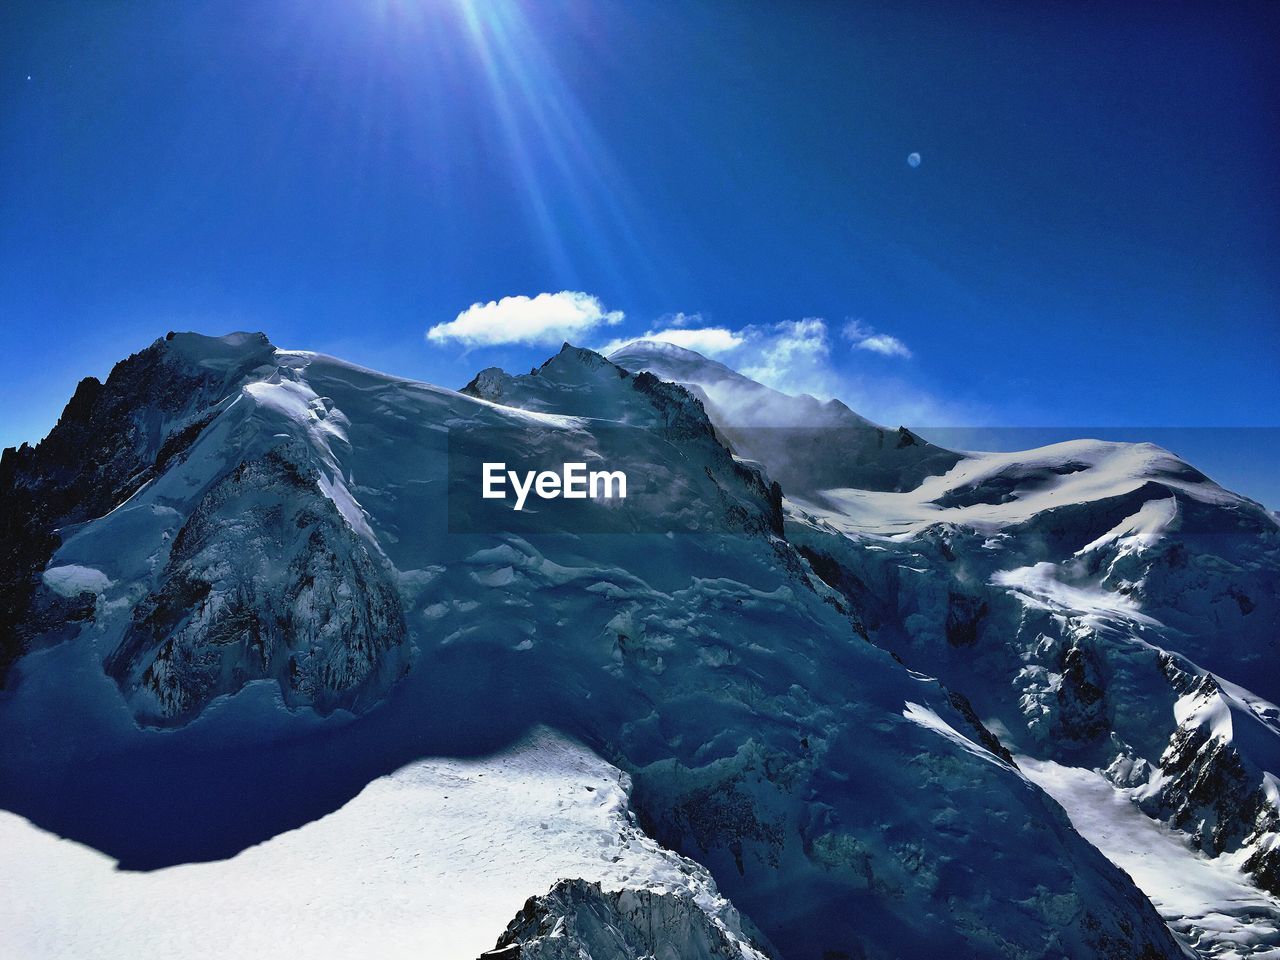 SCENIC VIEW OF SNOWCAPPED MOUNTAINS AGAINST BRIGHT SUN